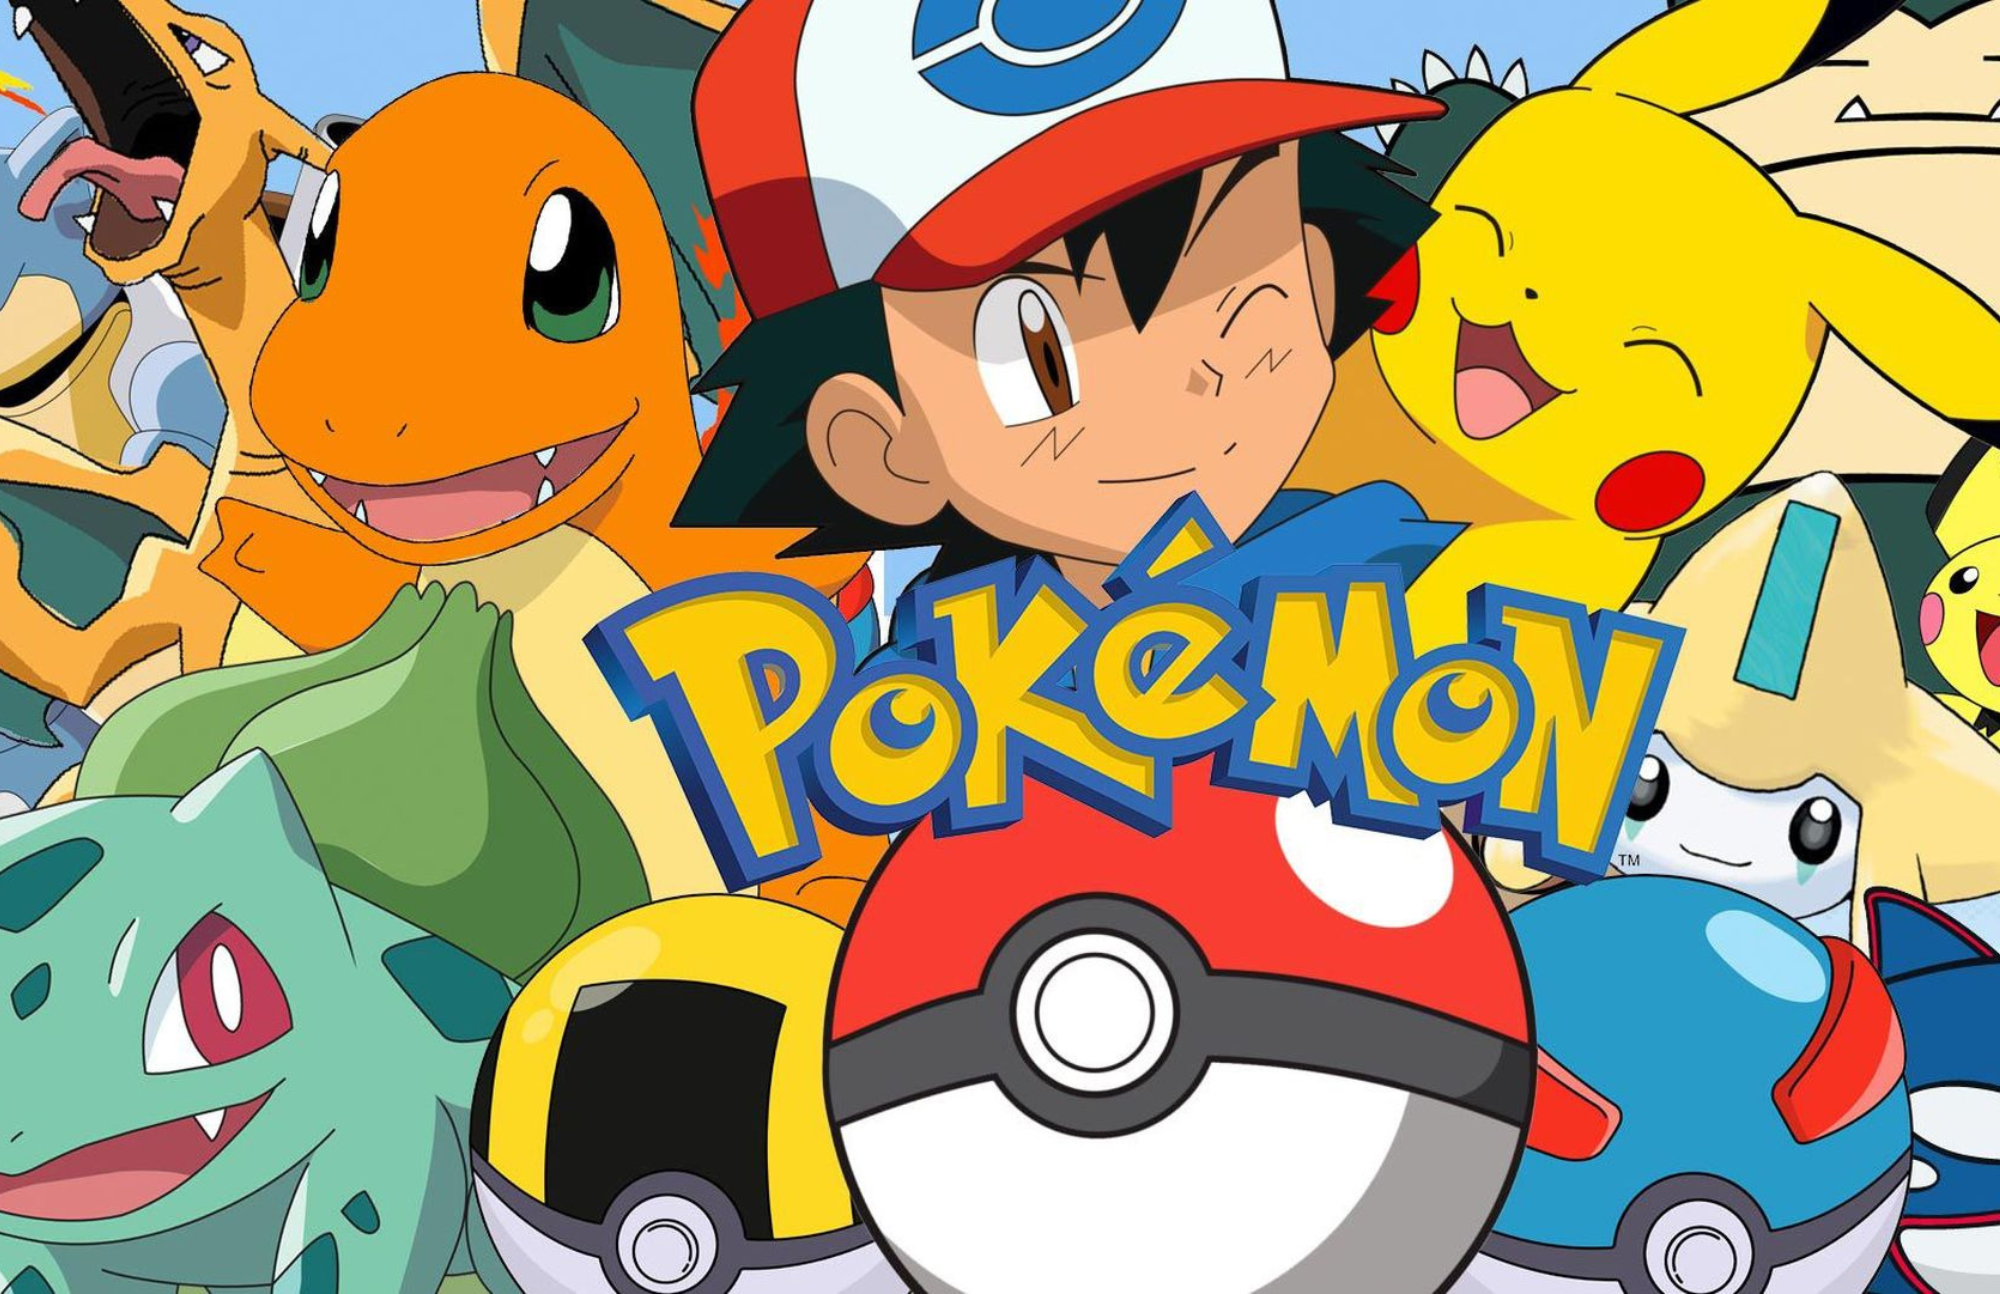 Pokémon logo and characters